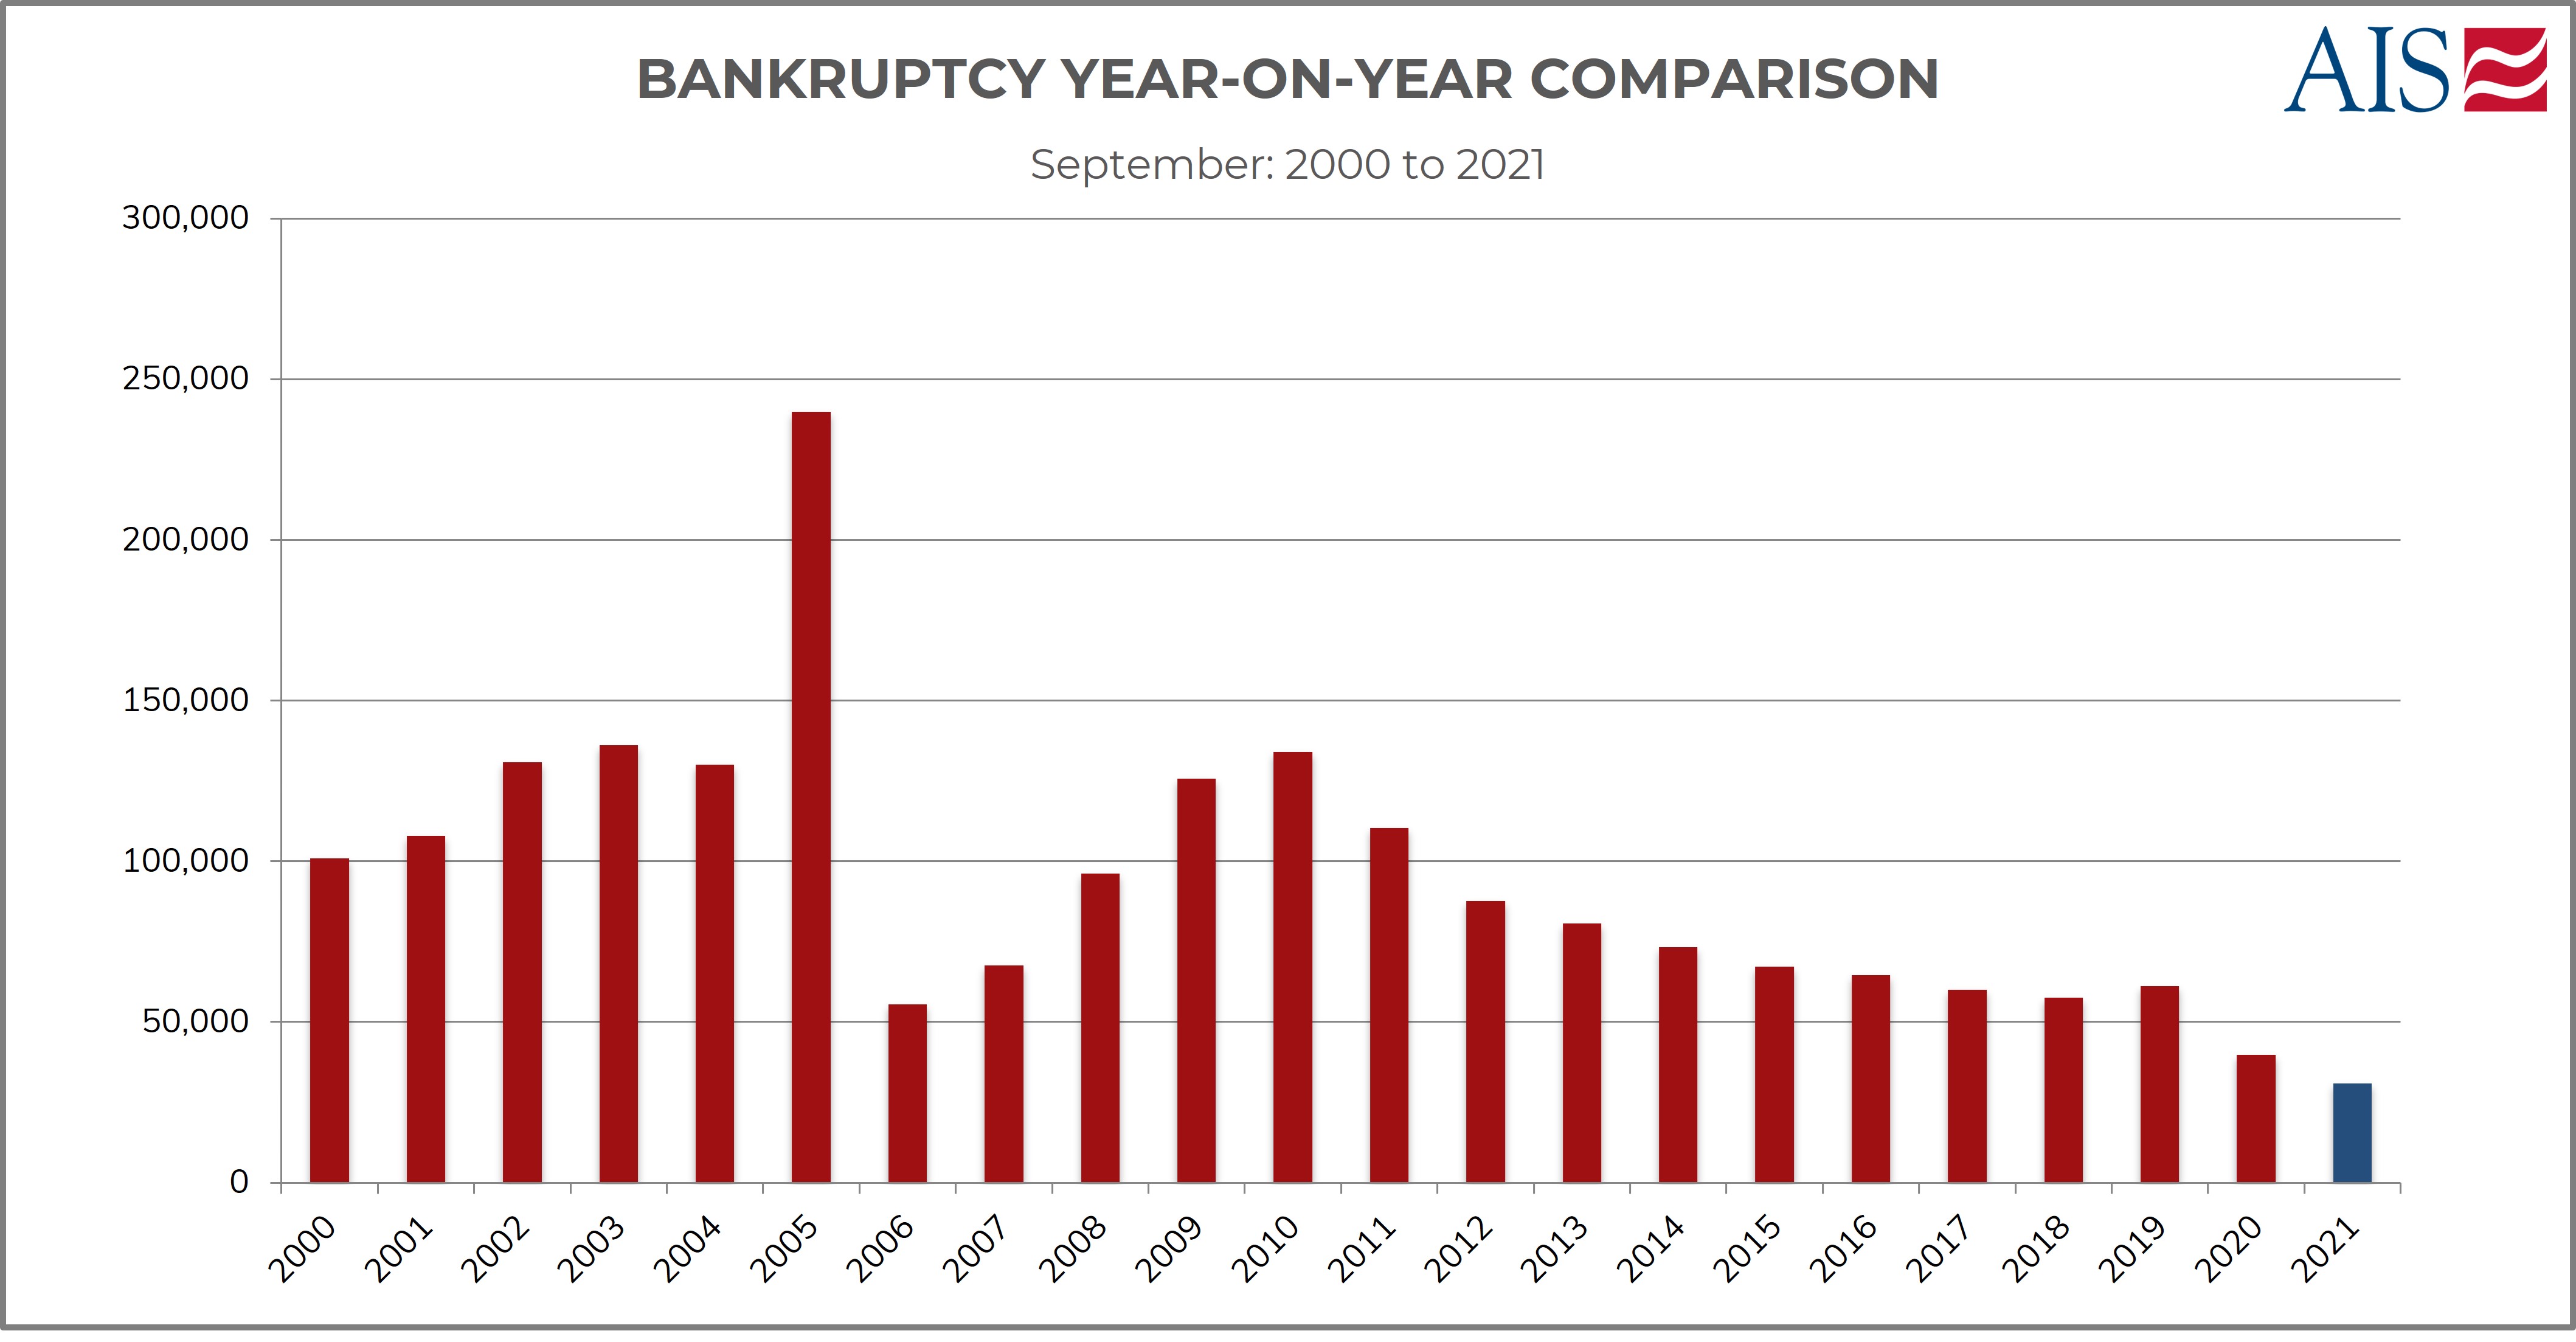 AIS Insight_Sept 2021_BANKRUPTCY YEAR ON YEAR COMPARISON-1